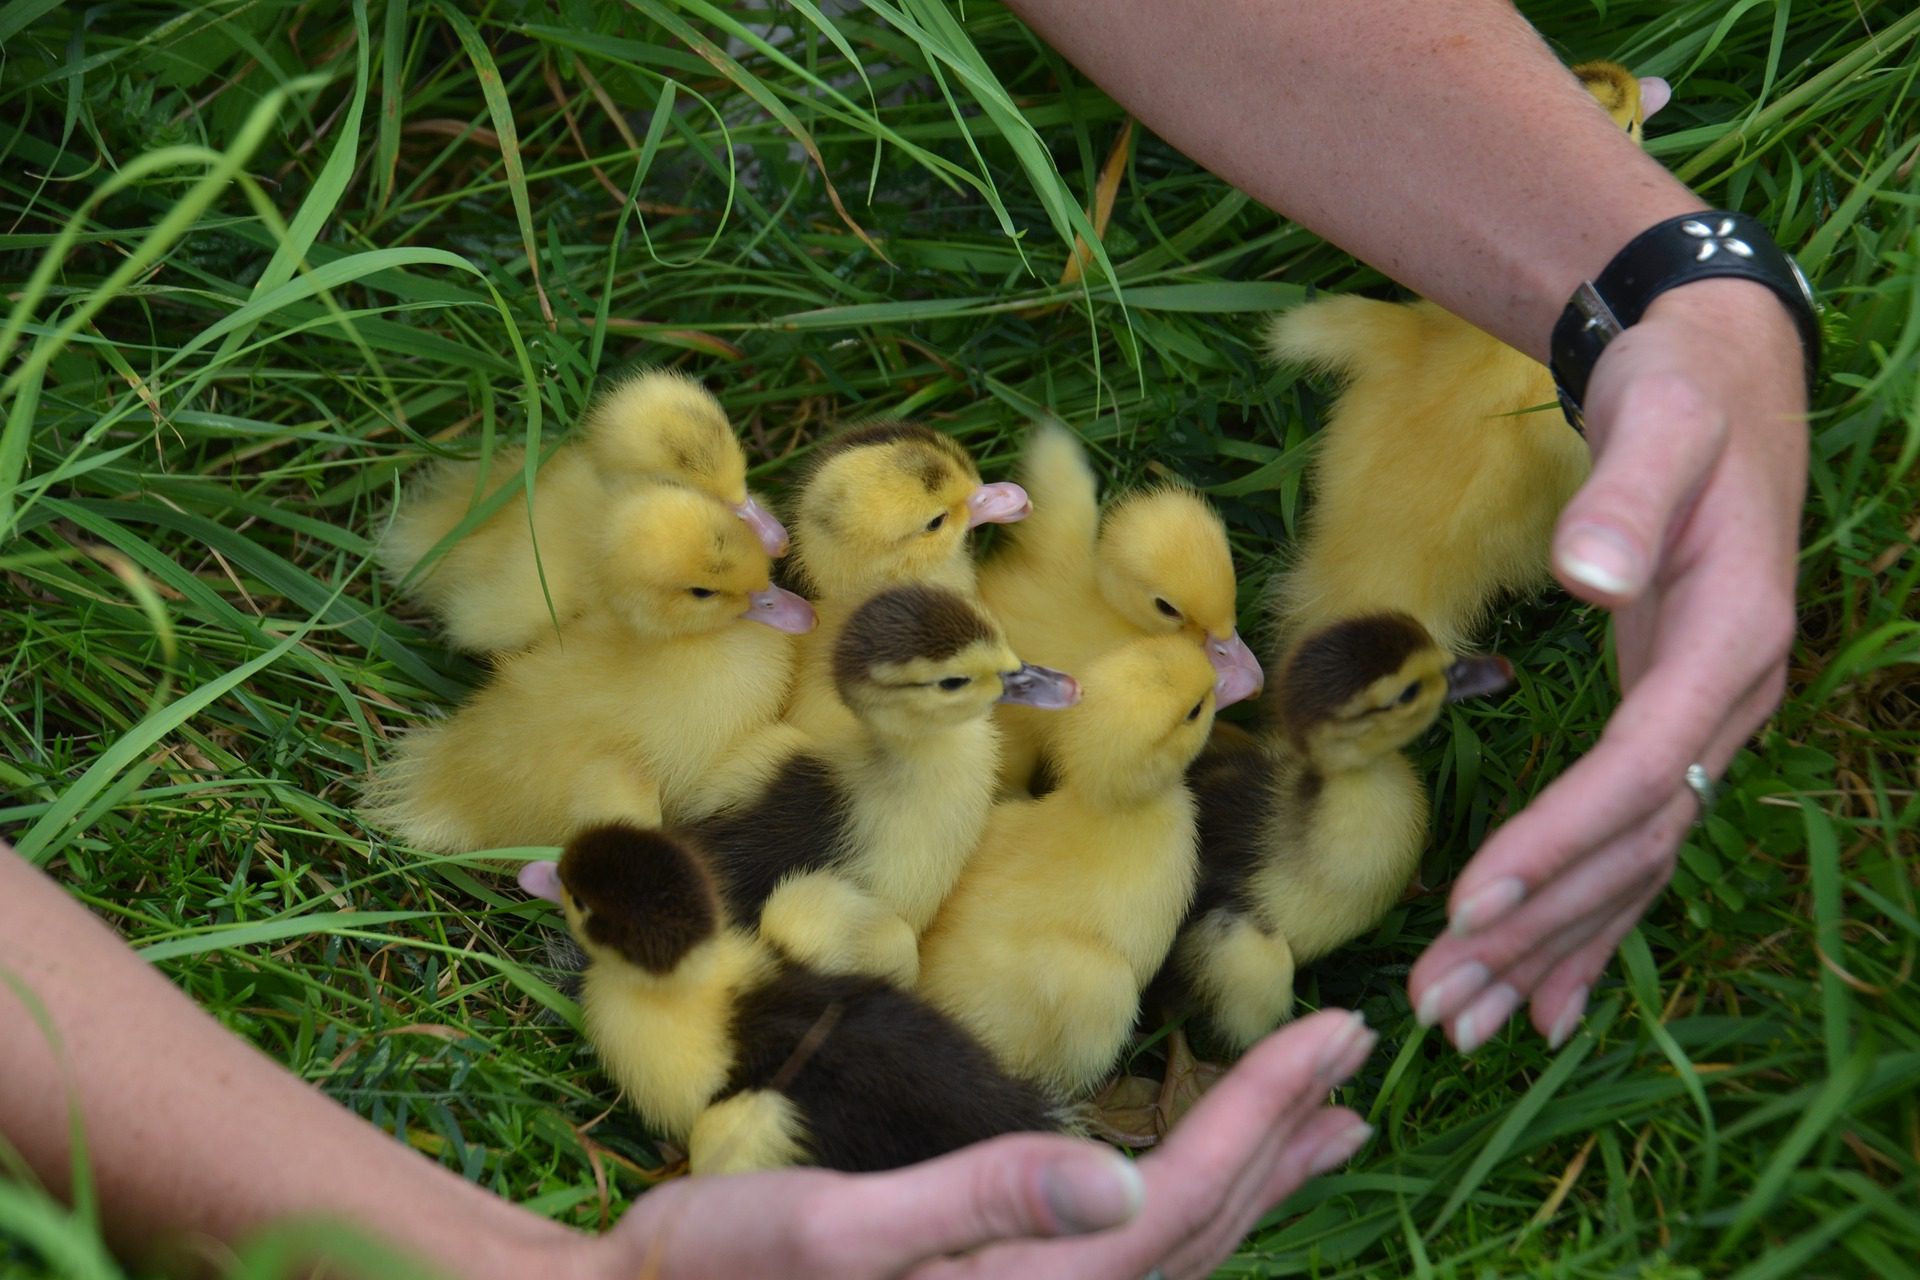 Clutch of yellow chicks on grass with two arms circling them. Credit: Marion Wellman via Pixabay